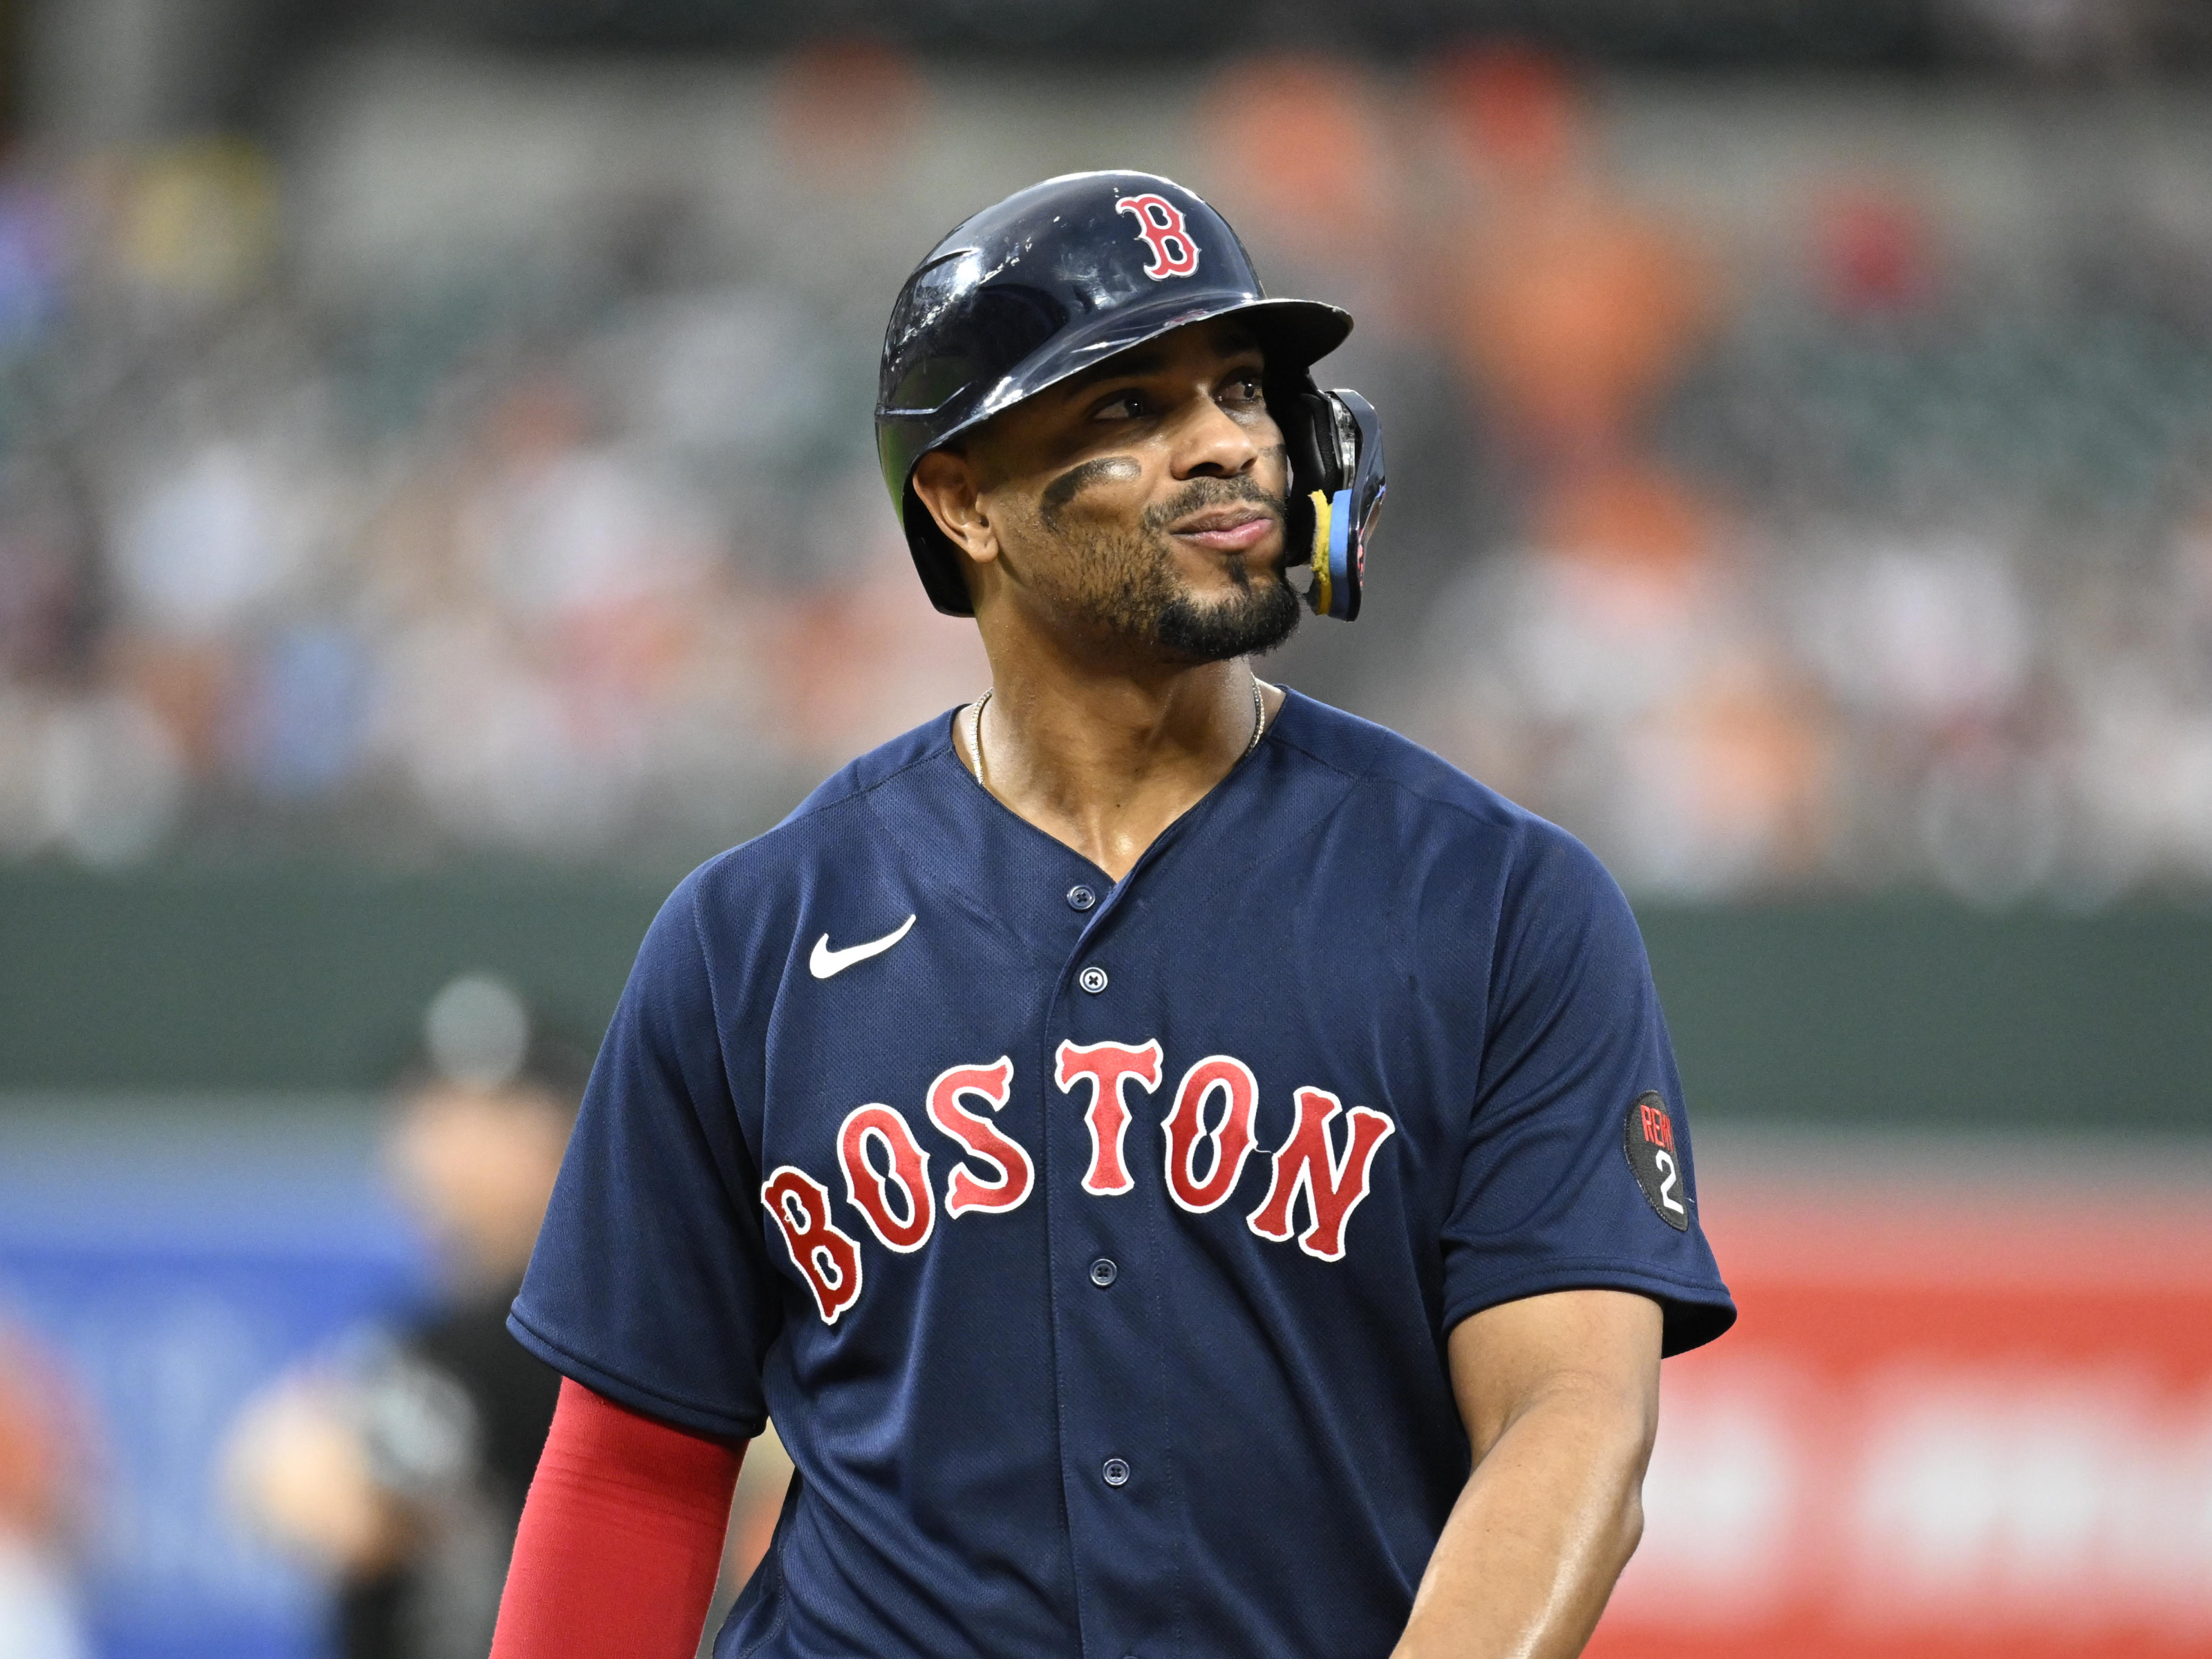 Boston Red Sox laughably short in Xander Bogaerts chase